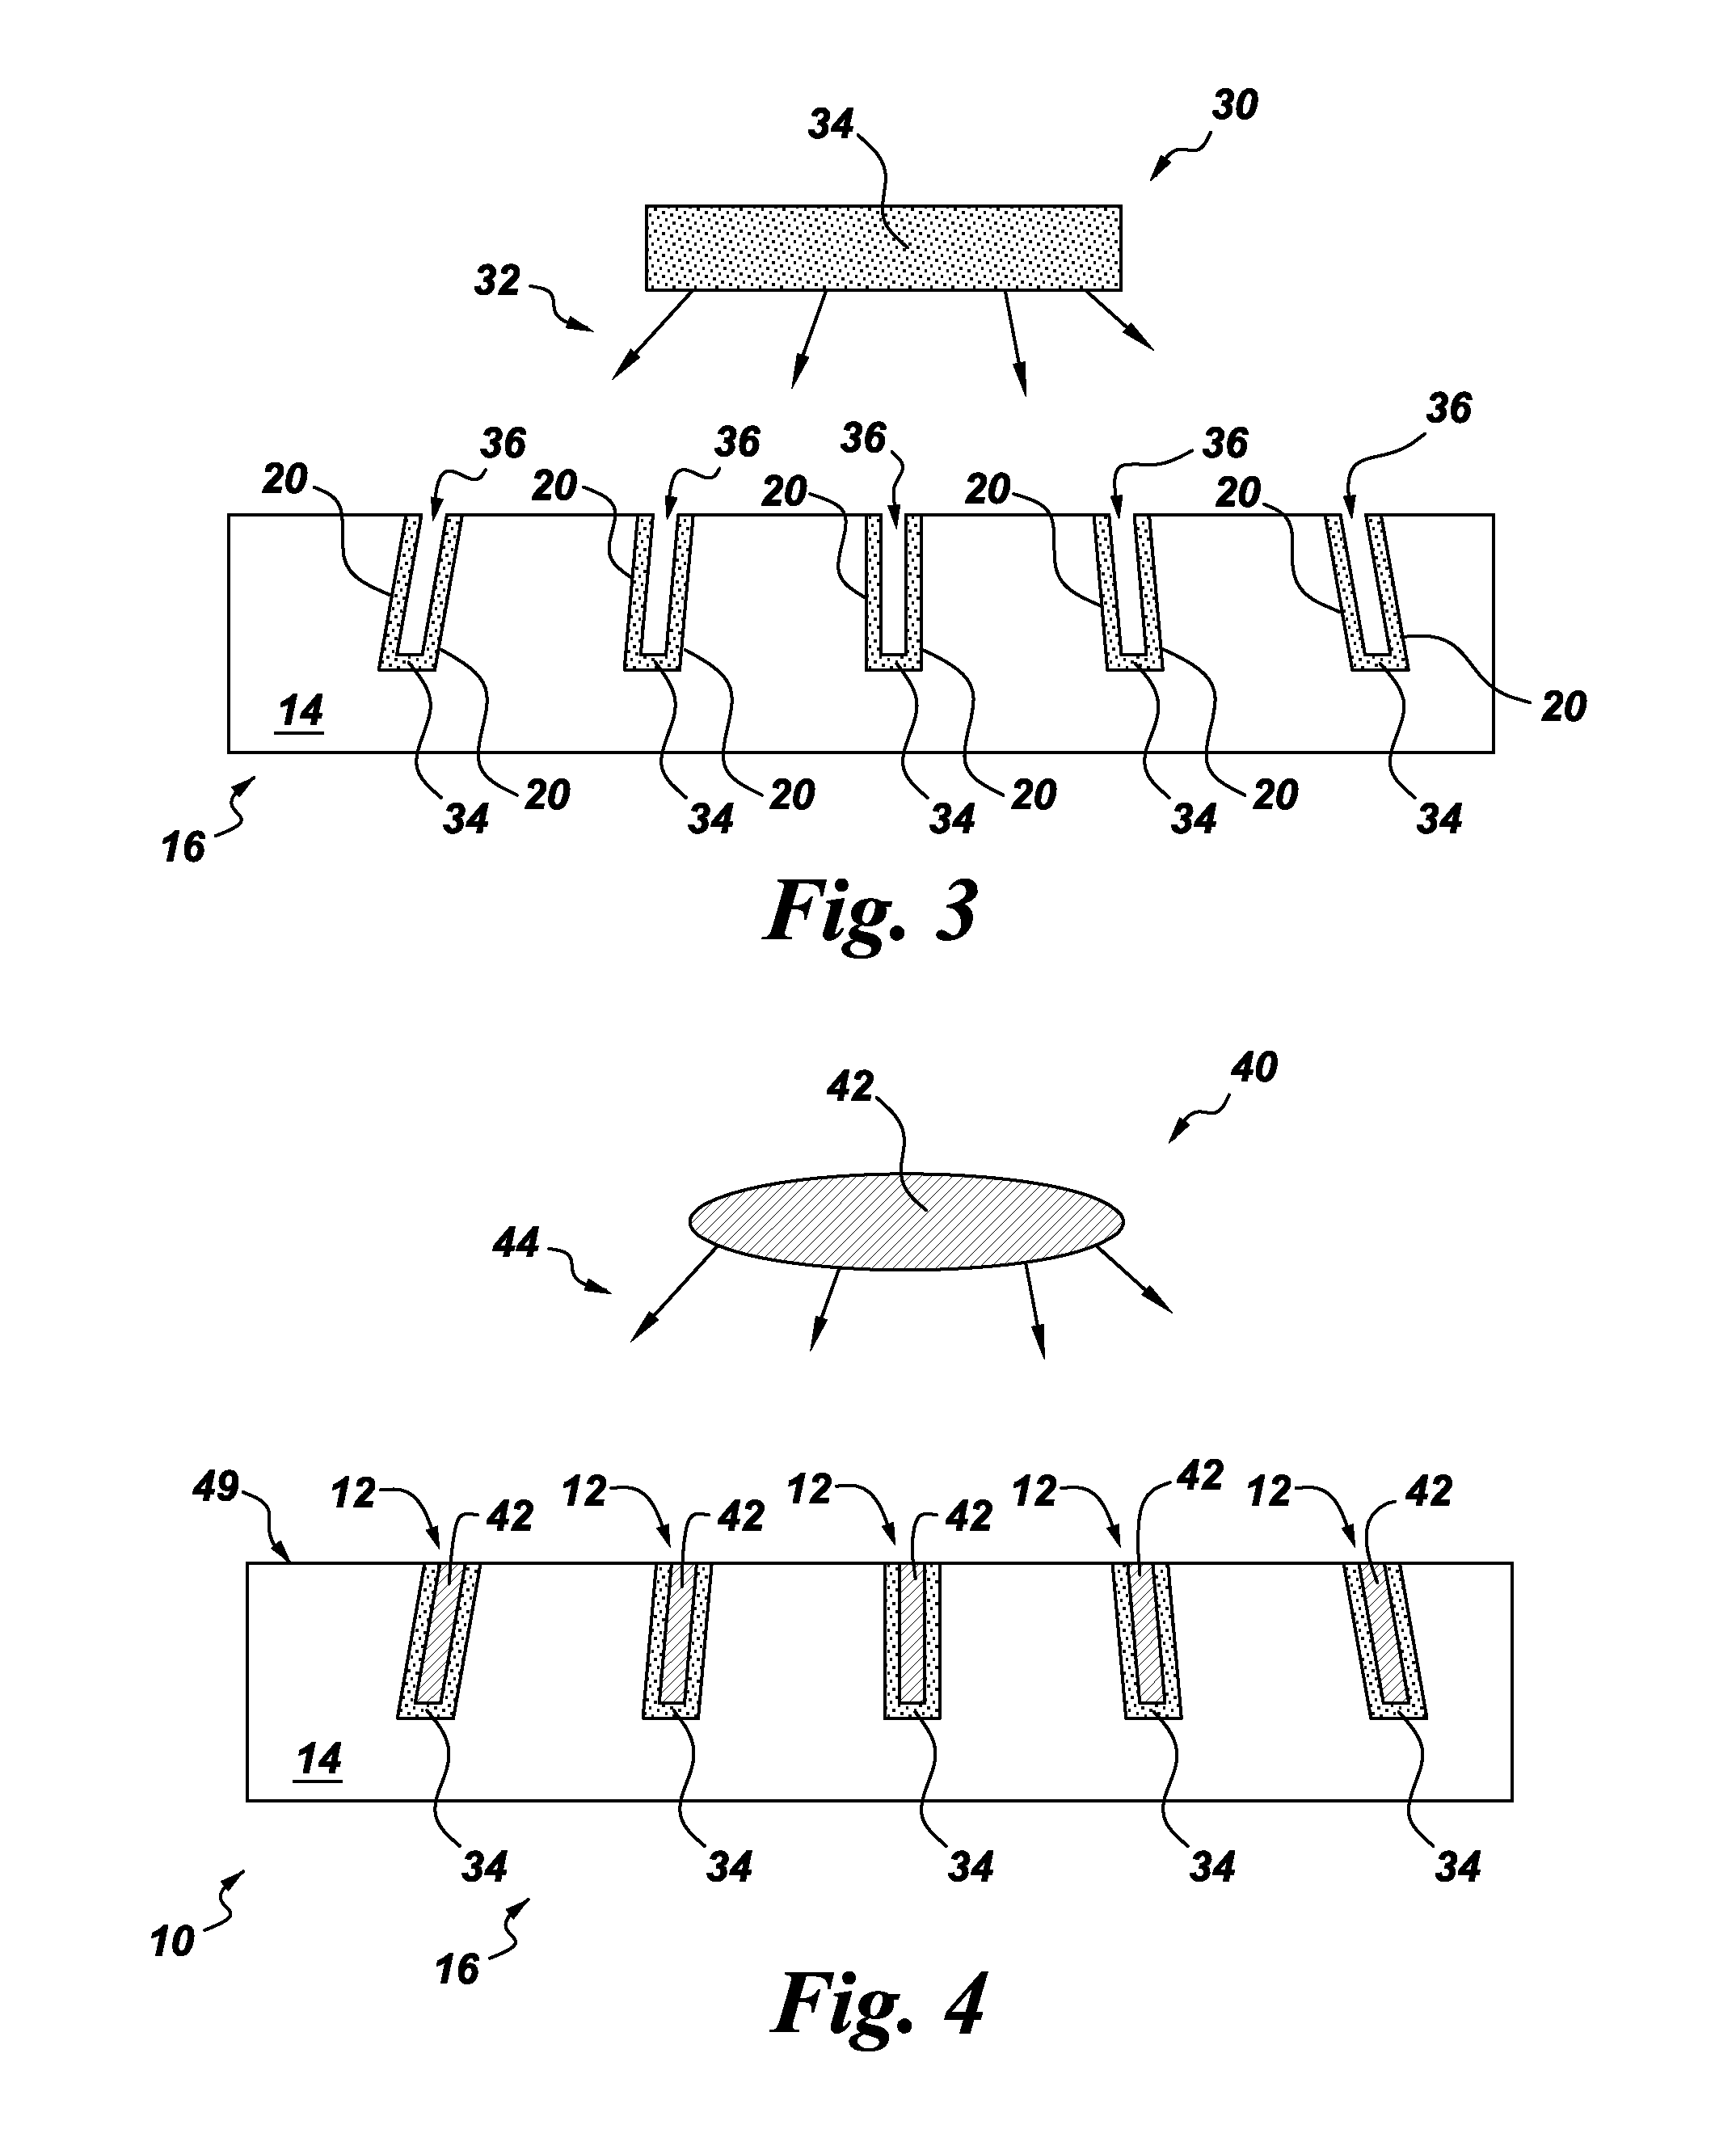 Anti-scatter X-ray grid device and method of making same